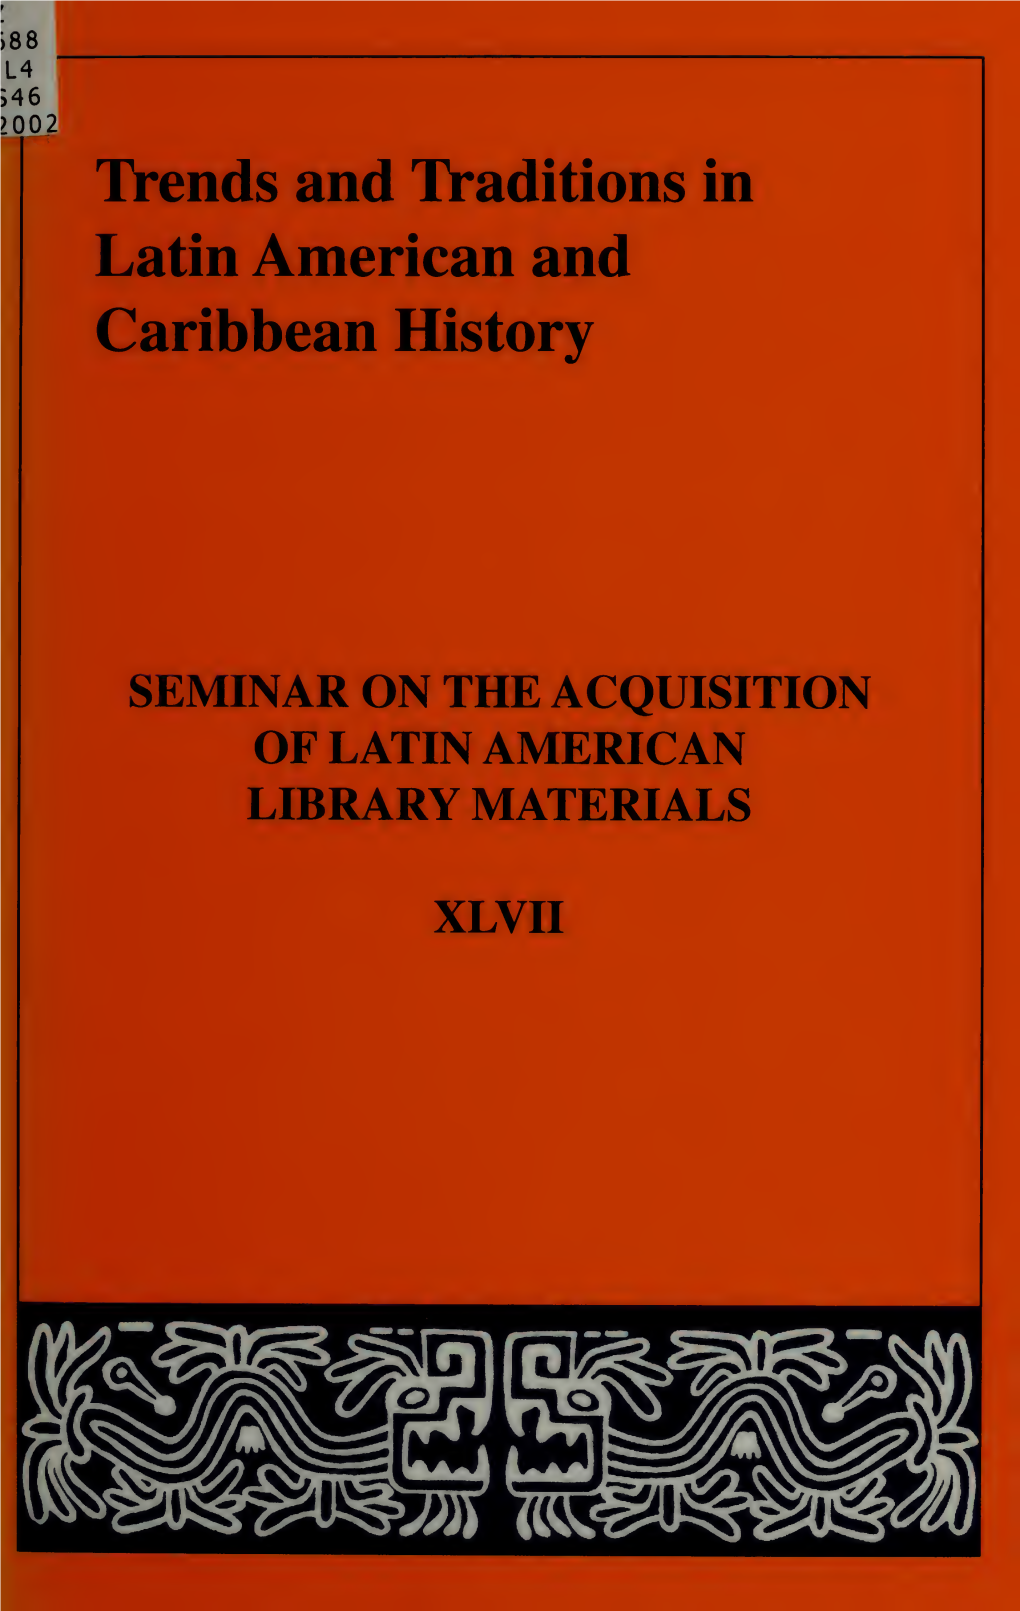 Papers of the Forty-Seventh Annual Meeting of the SEMINAR on the ACQUISITION of LATIN AMERICAN LIBRARY MATERIALS